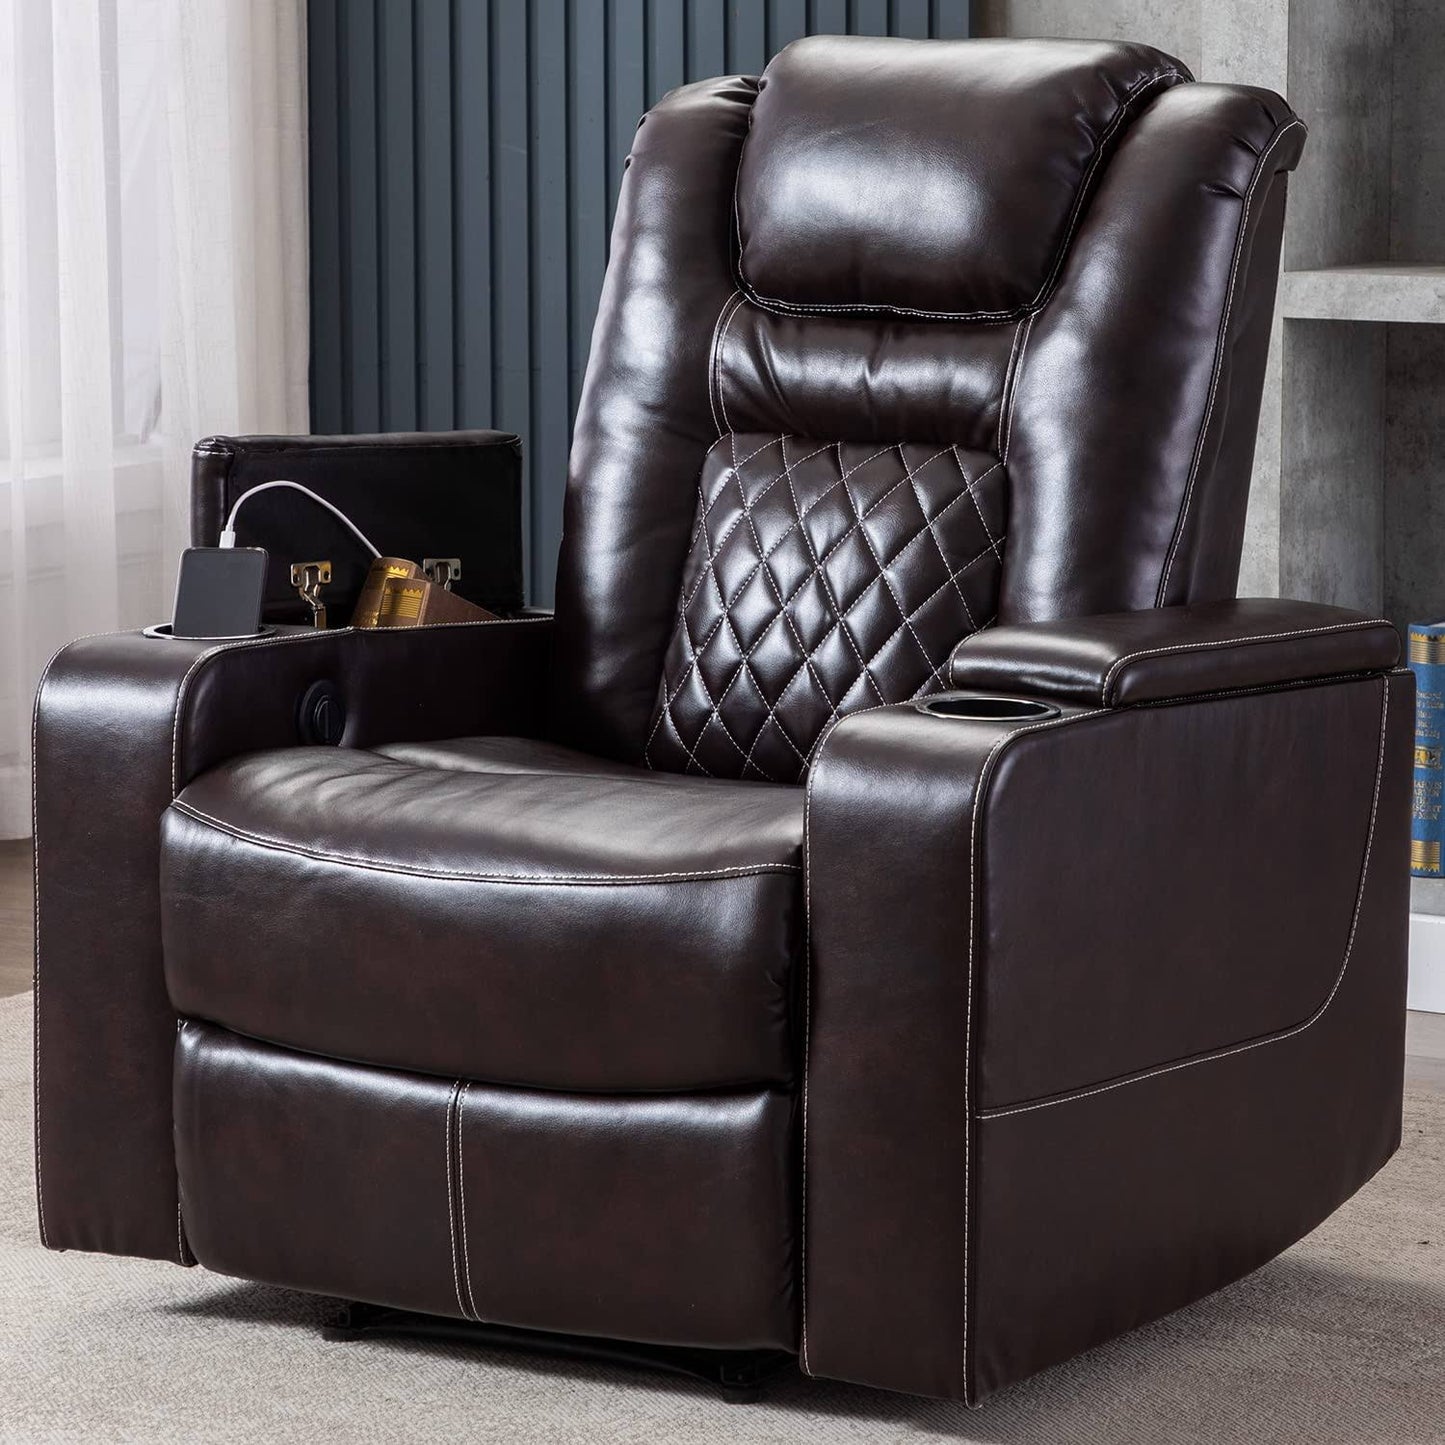 Electric Power Recliner Chair With Usb Ports And Cup Holders, Breathable Leather Home Theater Seating With Hidden Arm Storage (Brown)